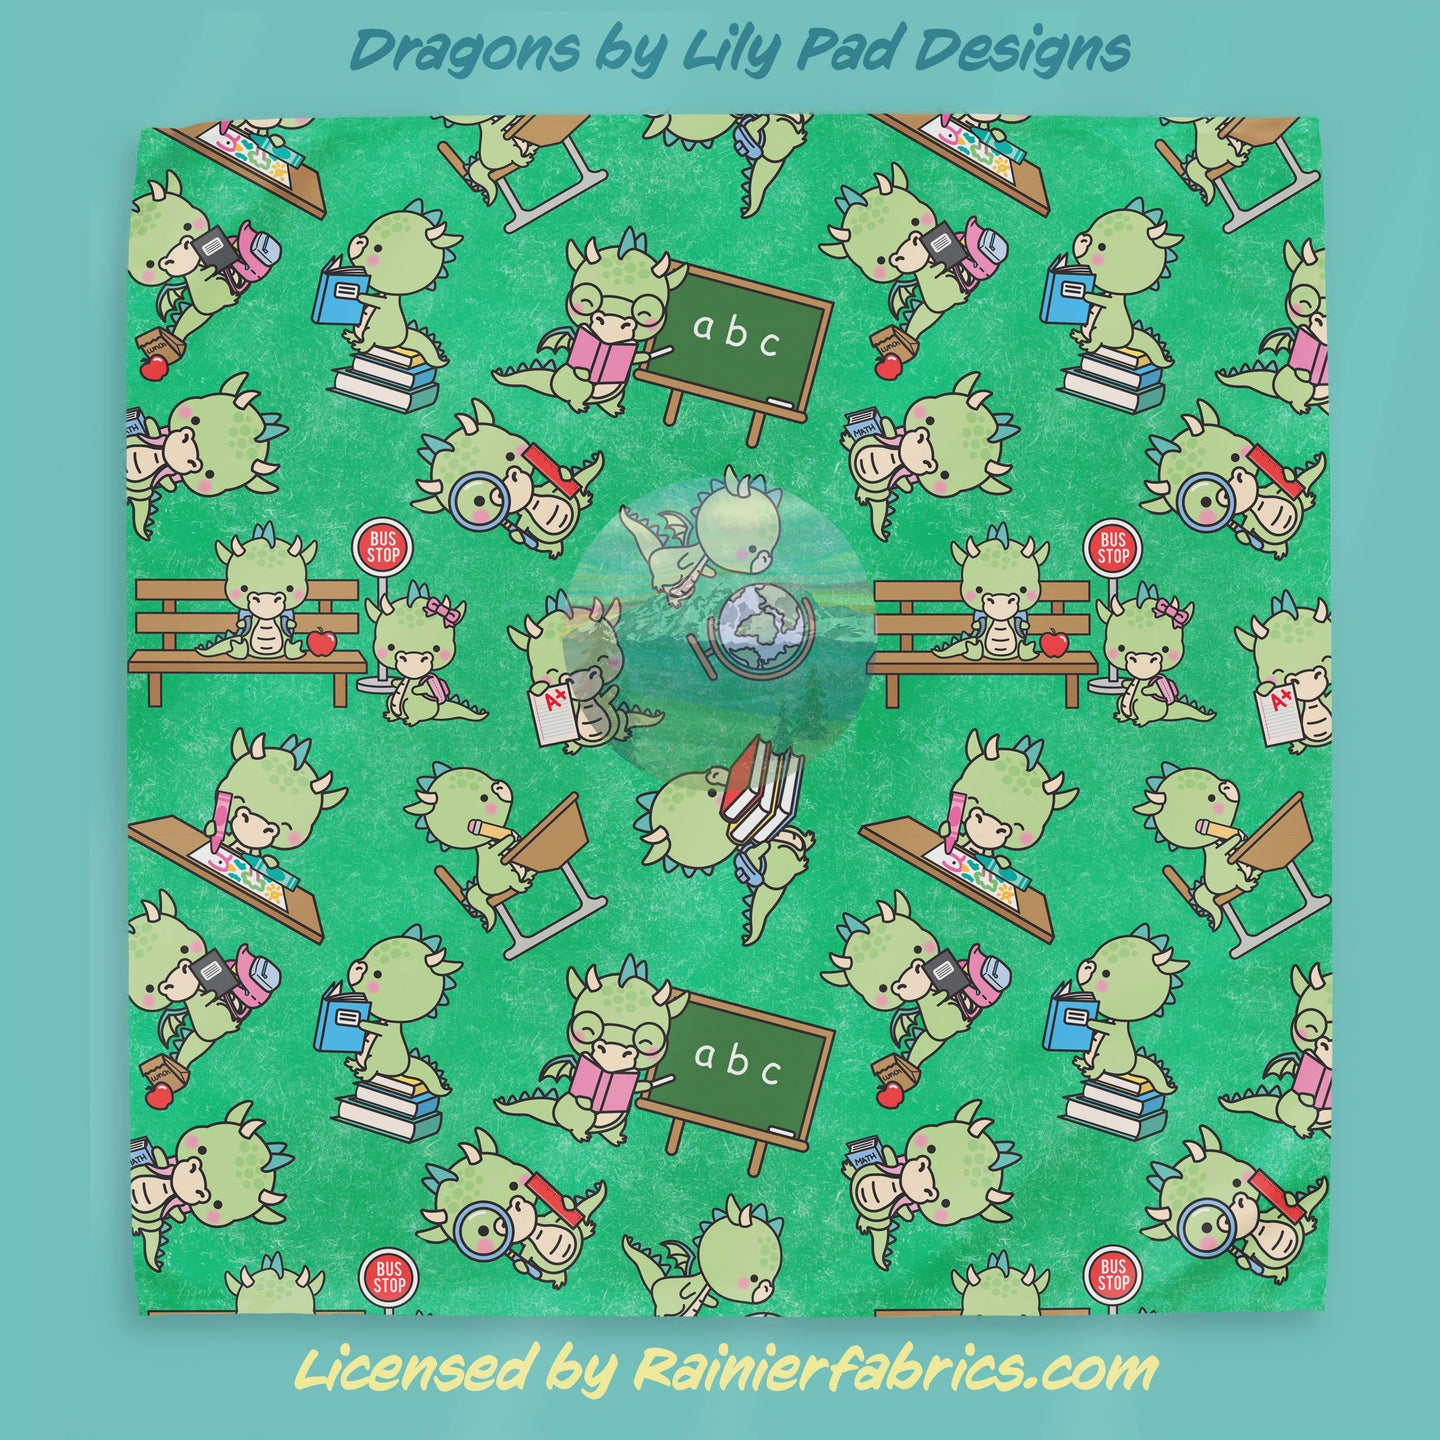 Dragons by Lily Pad Designs - TAT 2-5 Business Days - Order in 1/2 yard increments